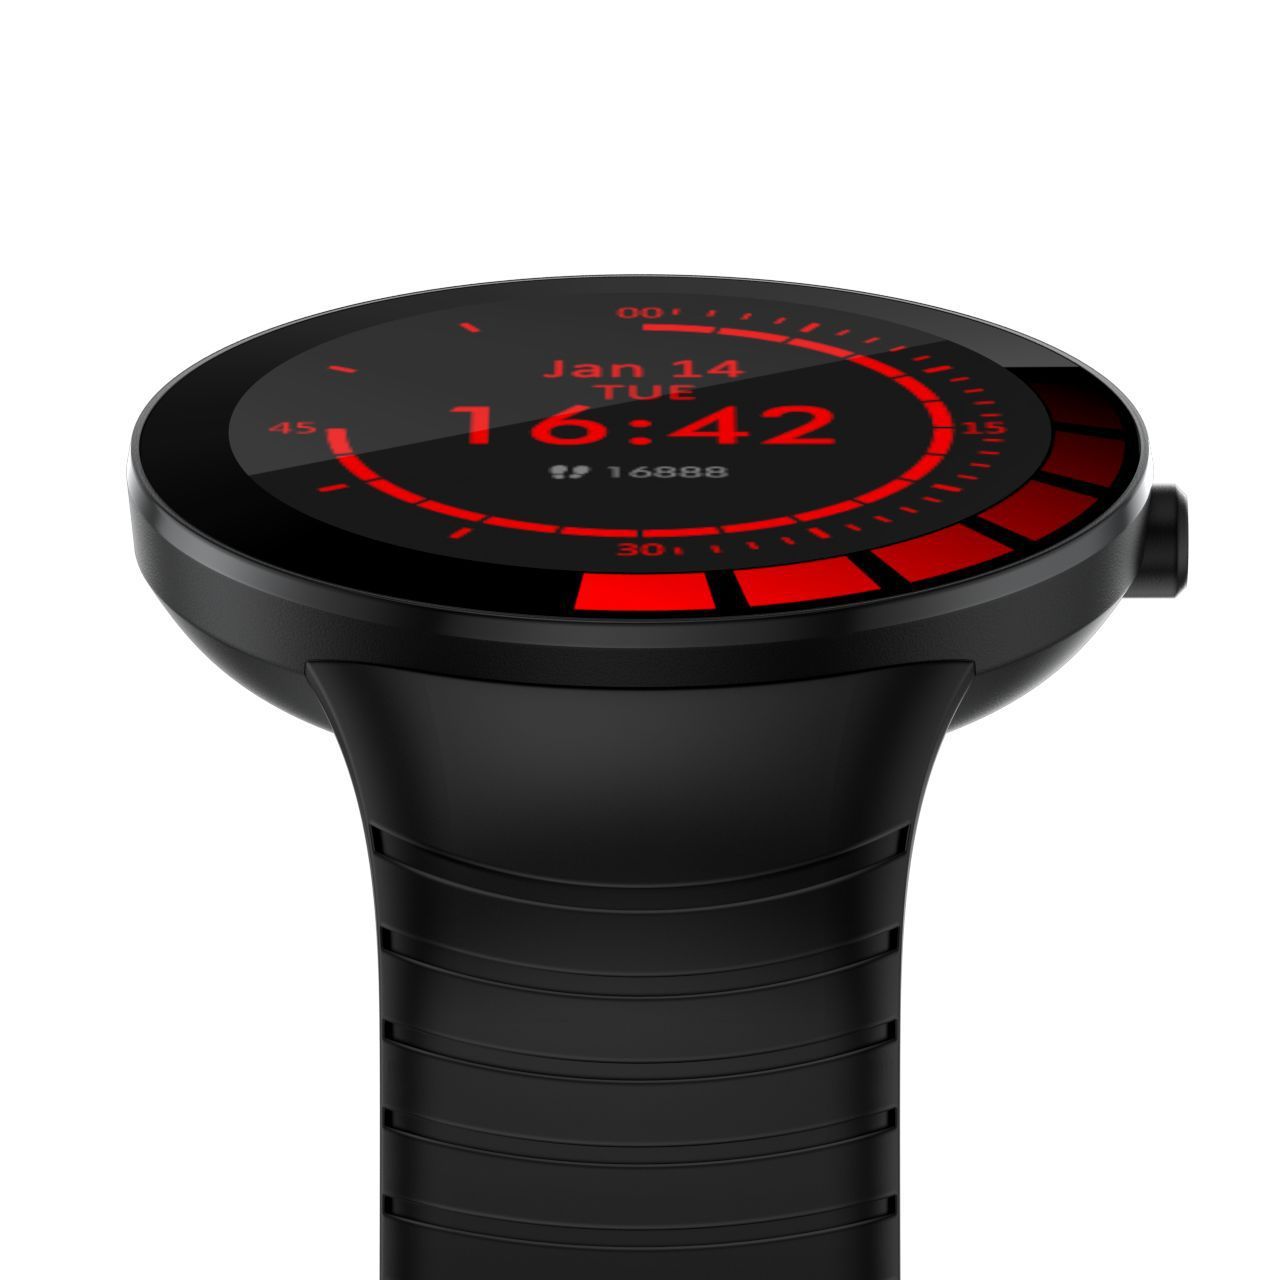 Sports Fitness Tracker Full Touch Screen